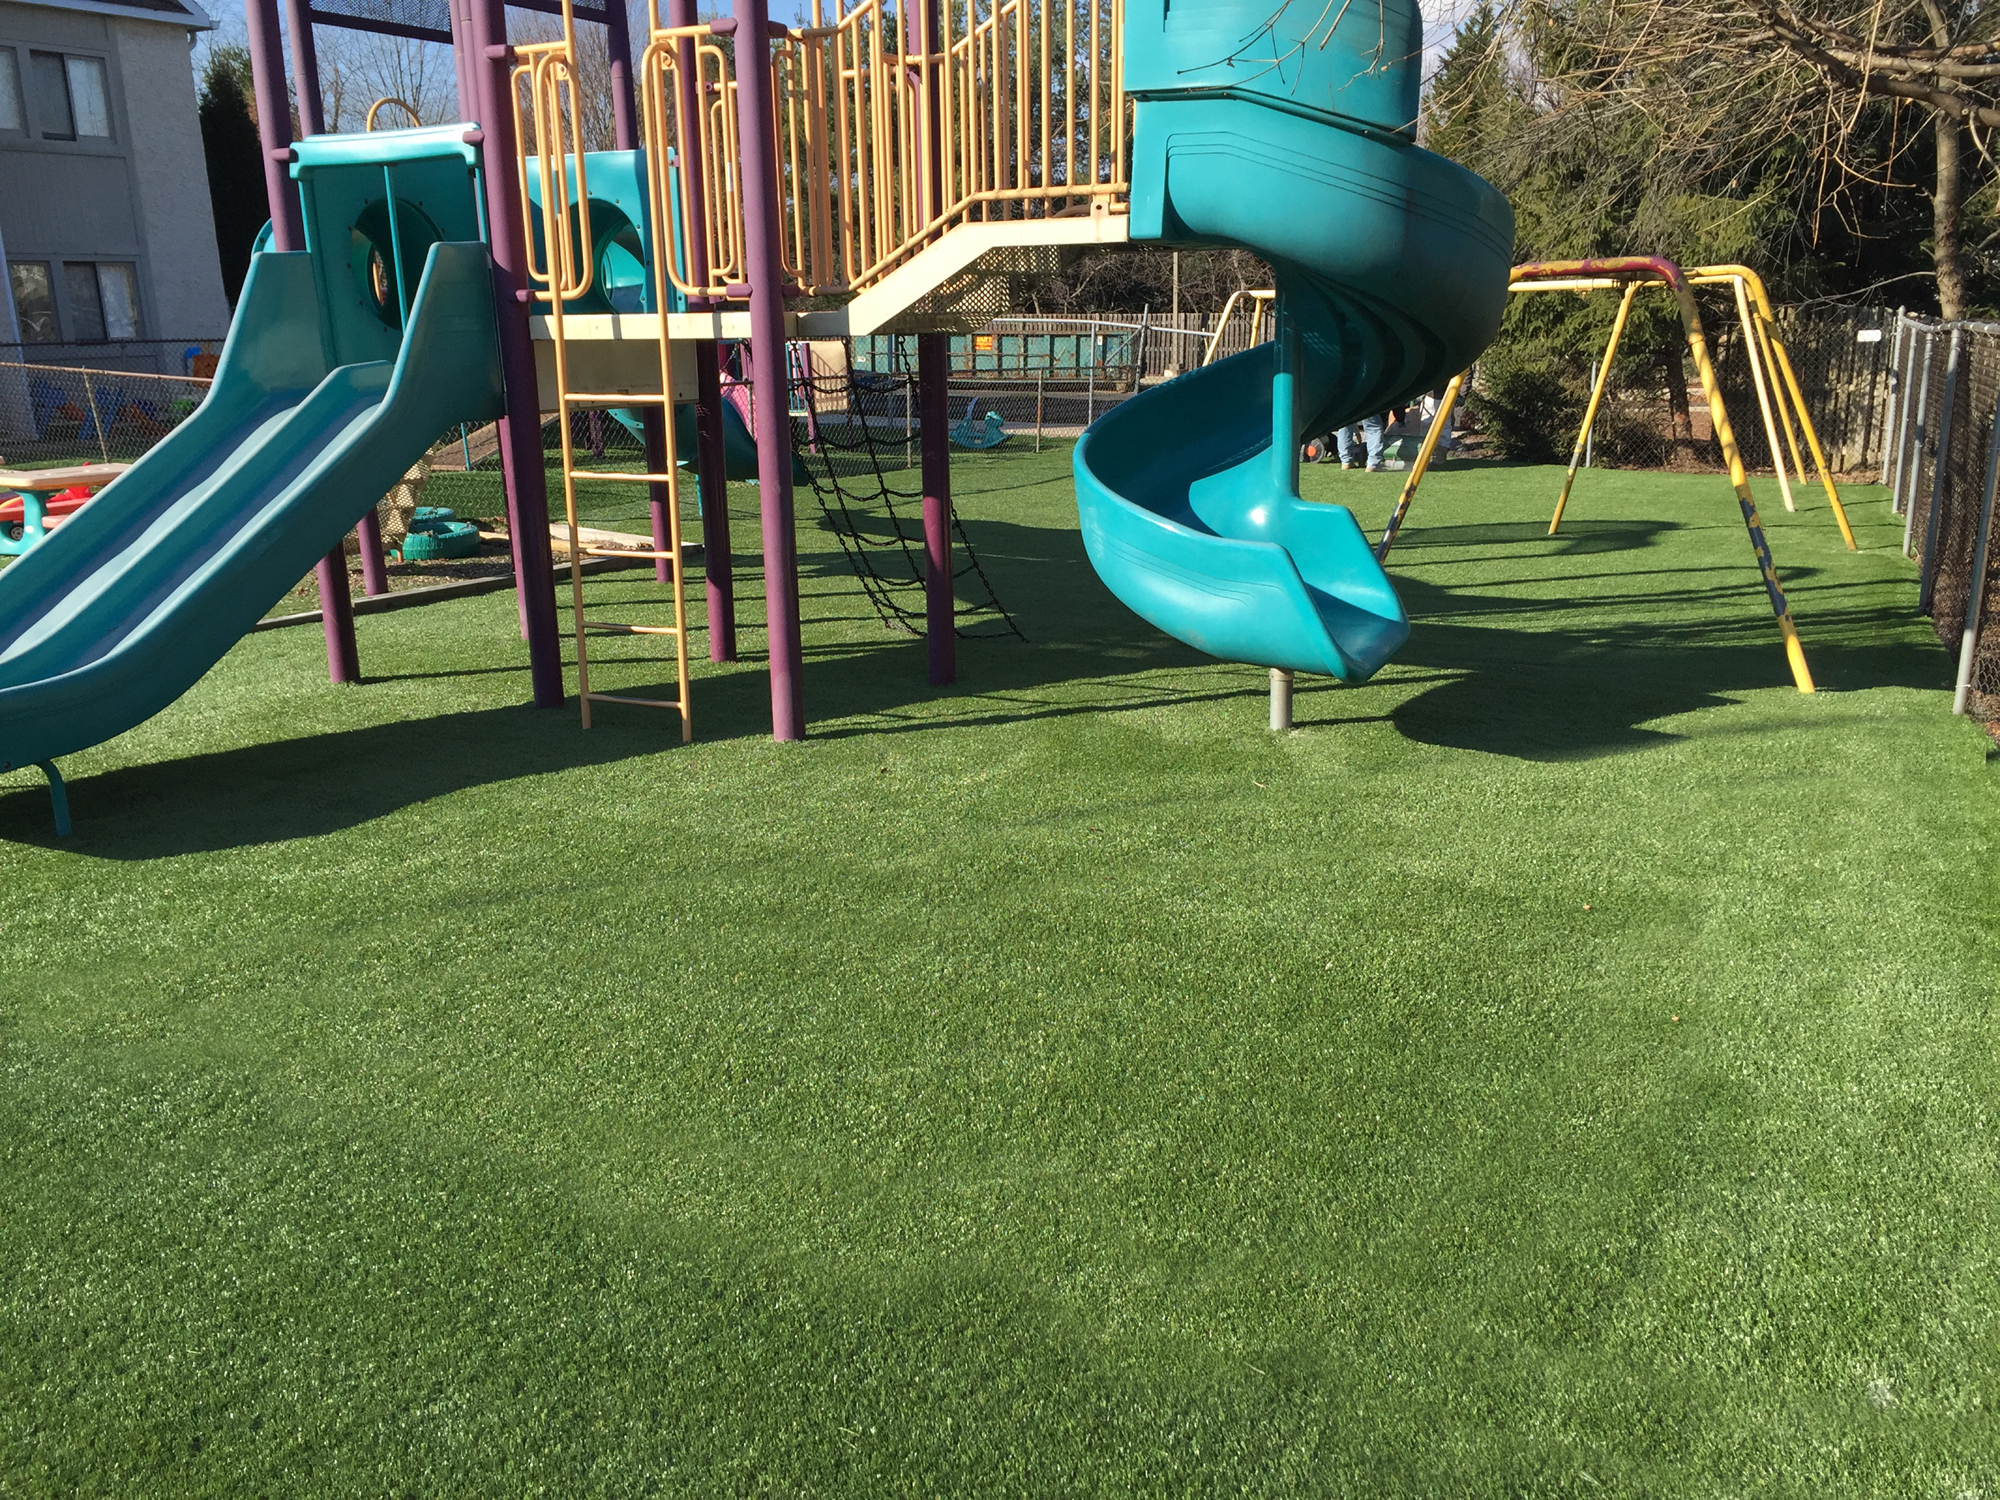 Colorful outdoor play equipment with artificial turf surface